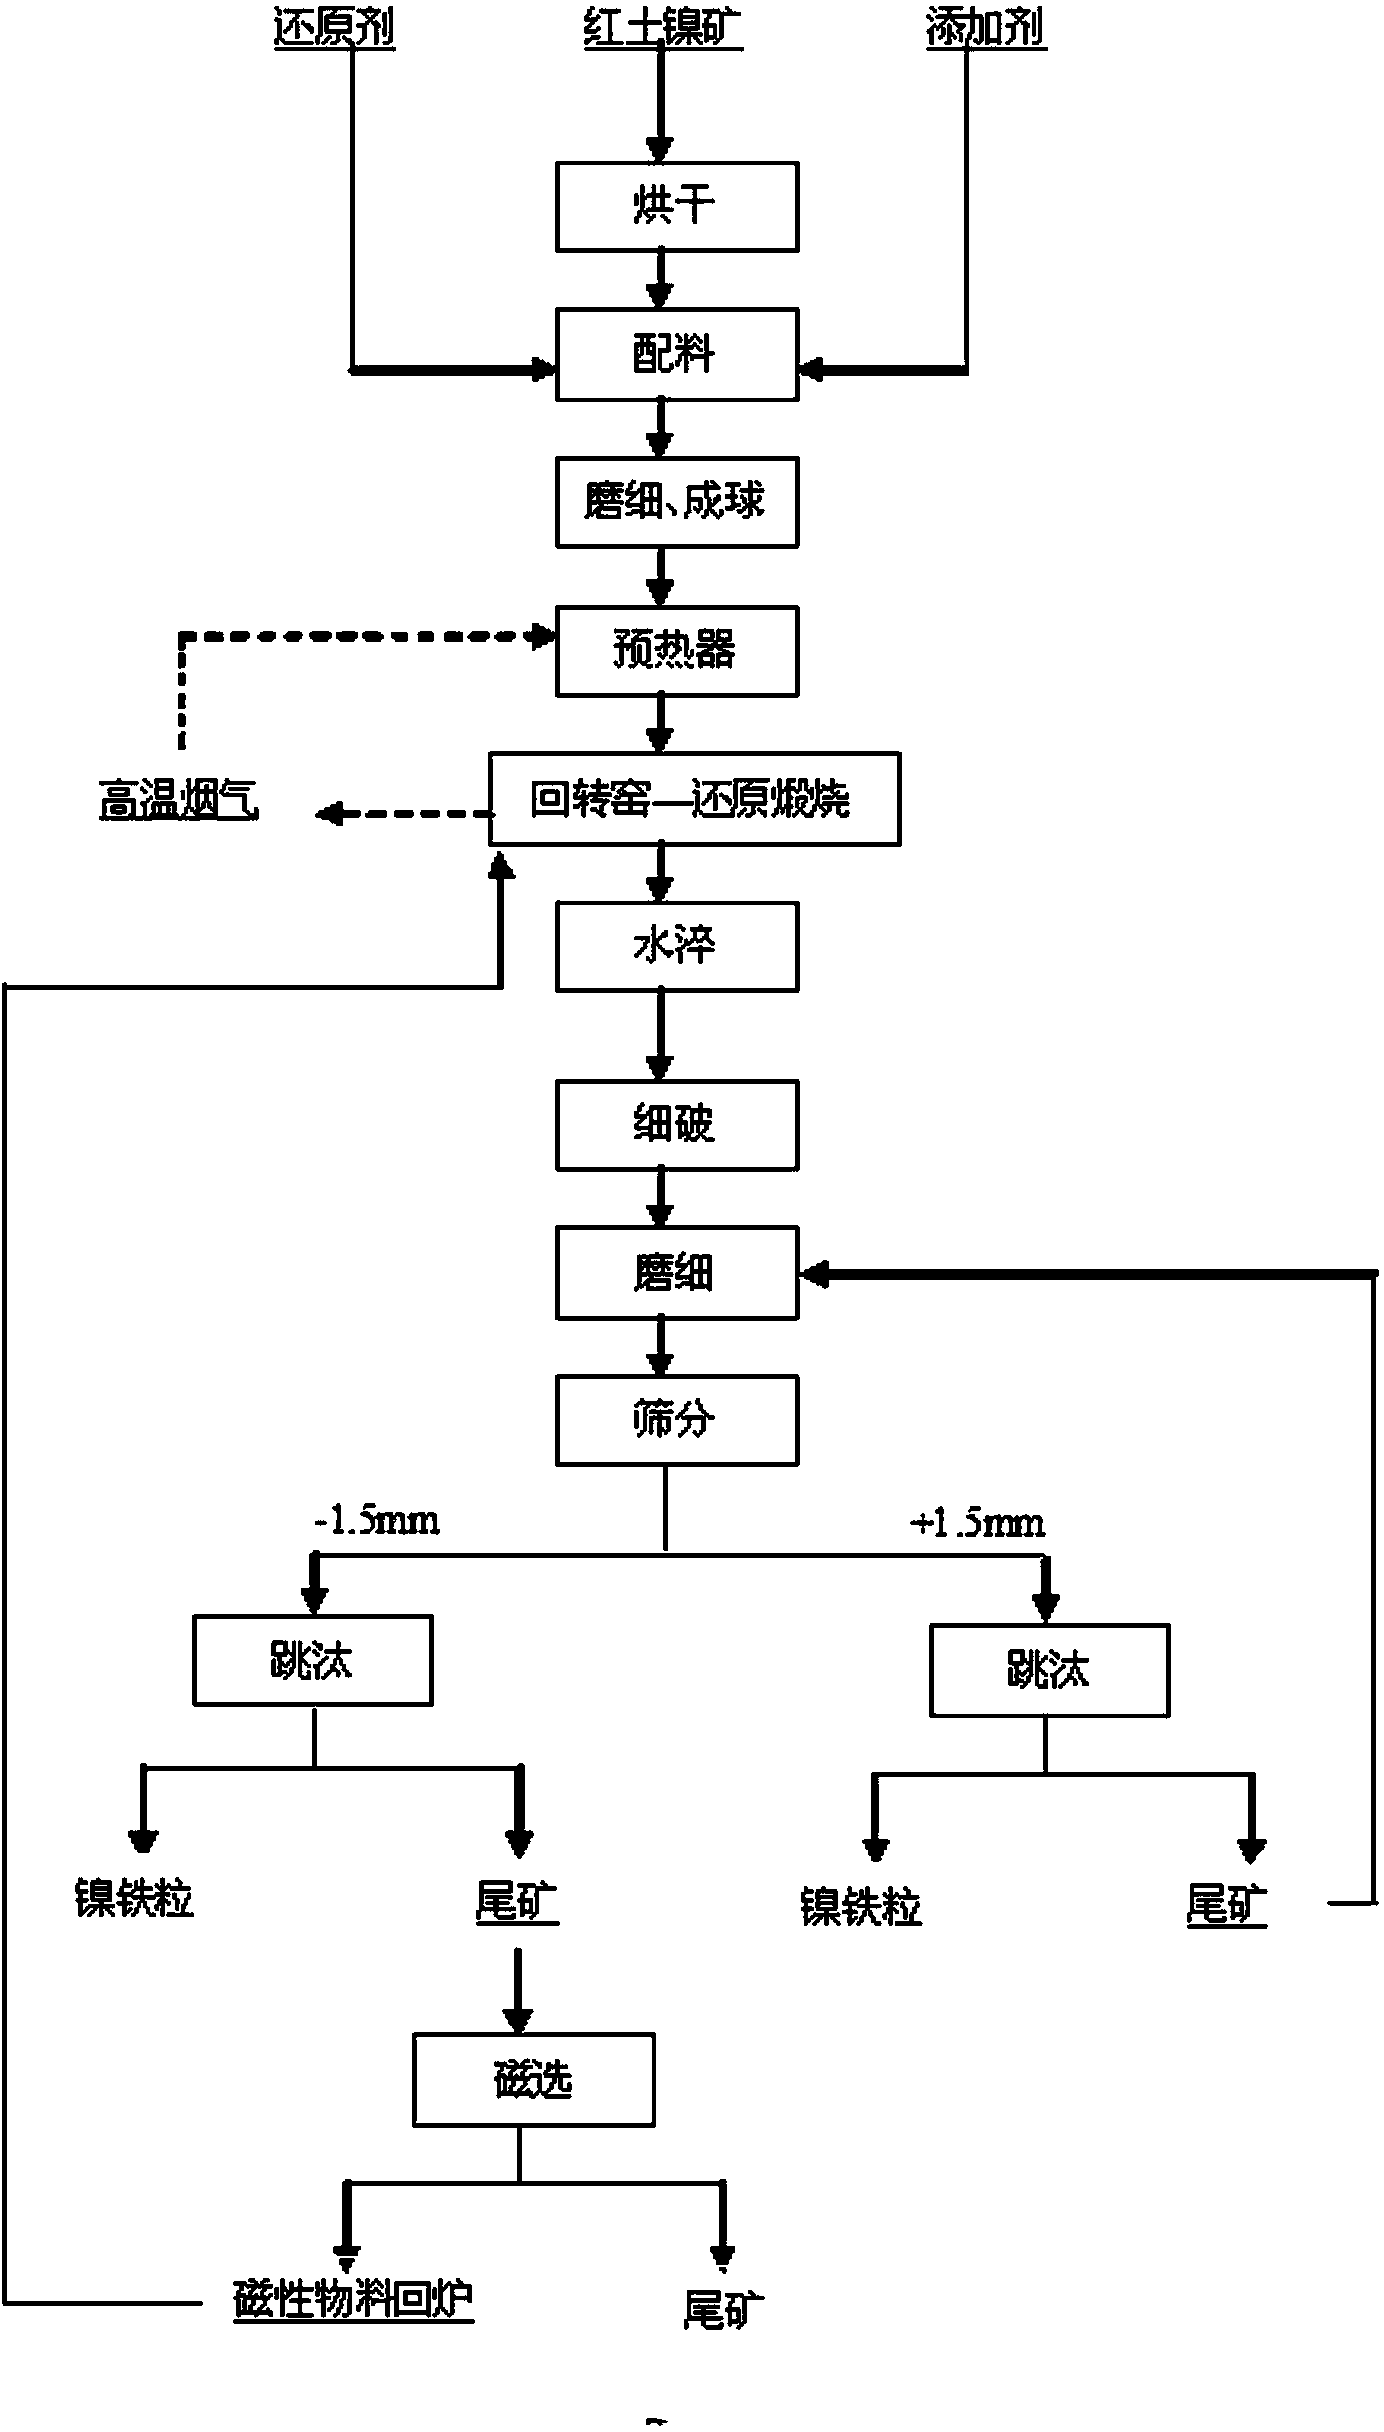 Method for producing nickel-iron particles by using coal-based reducing agent to directly reduce laterite nickel ore